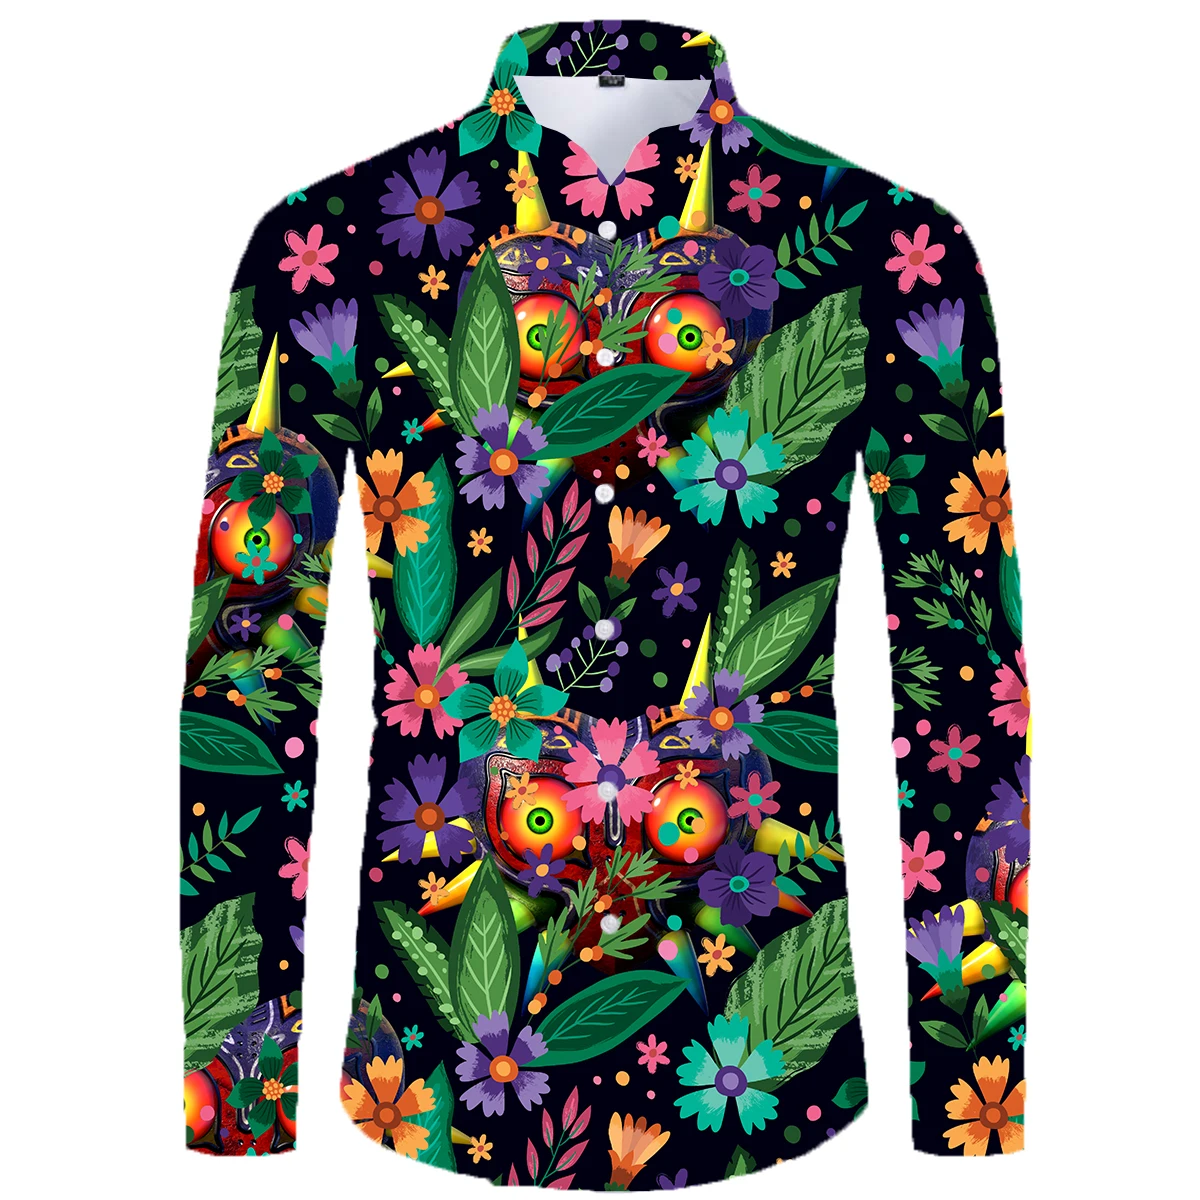 

Luxury Floral Colorful Shirt Mens New Slim Fit Long Sleeve Camisa Masculina Chemise Homme Social Men Club Prom Hawaiian Shirt-9